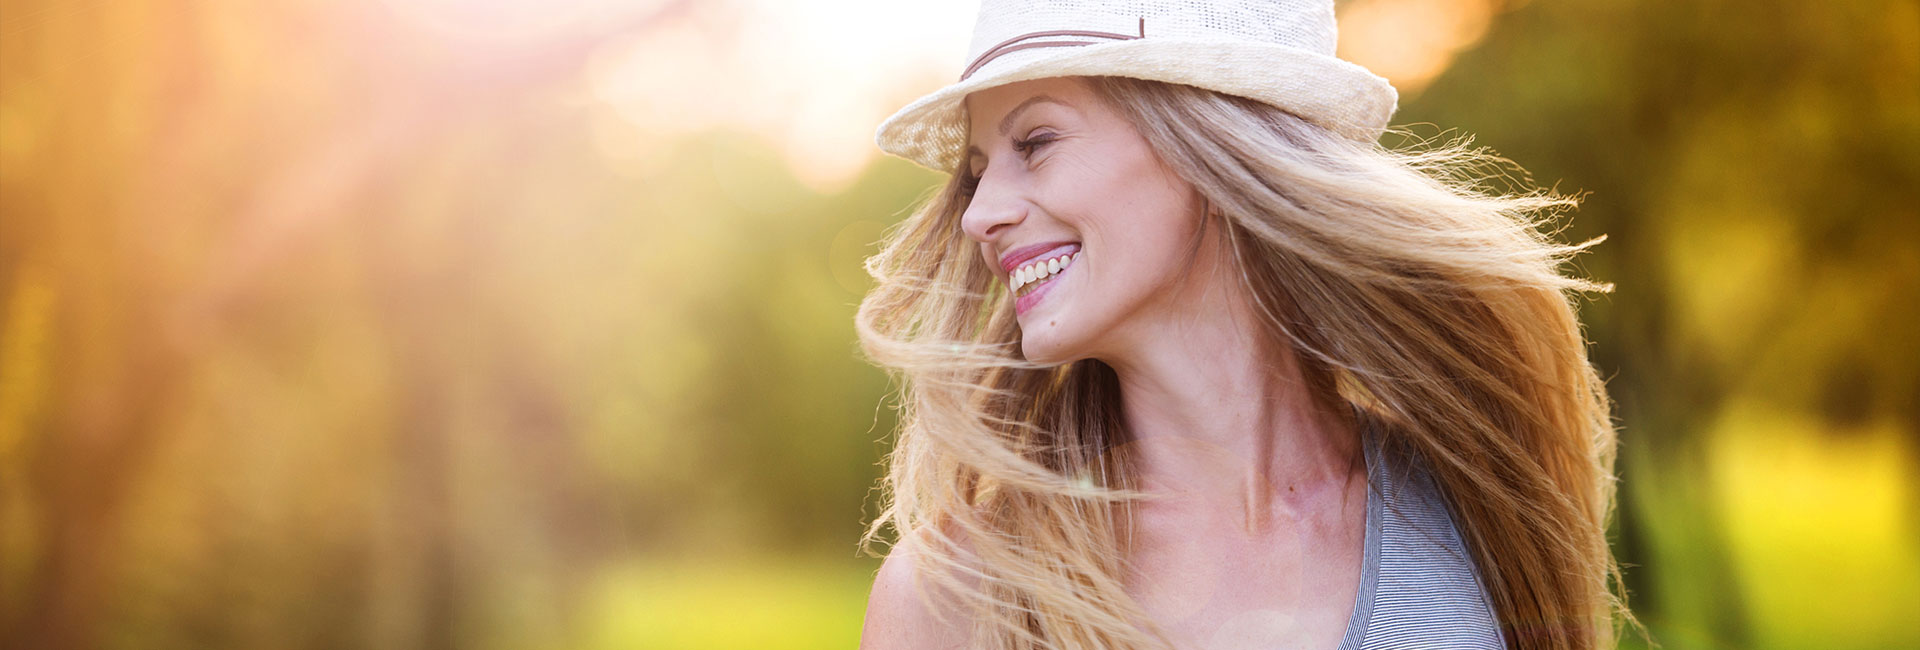 Woman in white hat laughing in sunny park